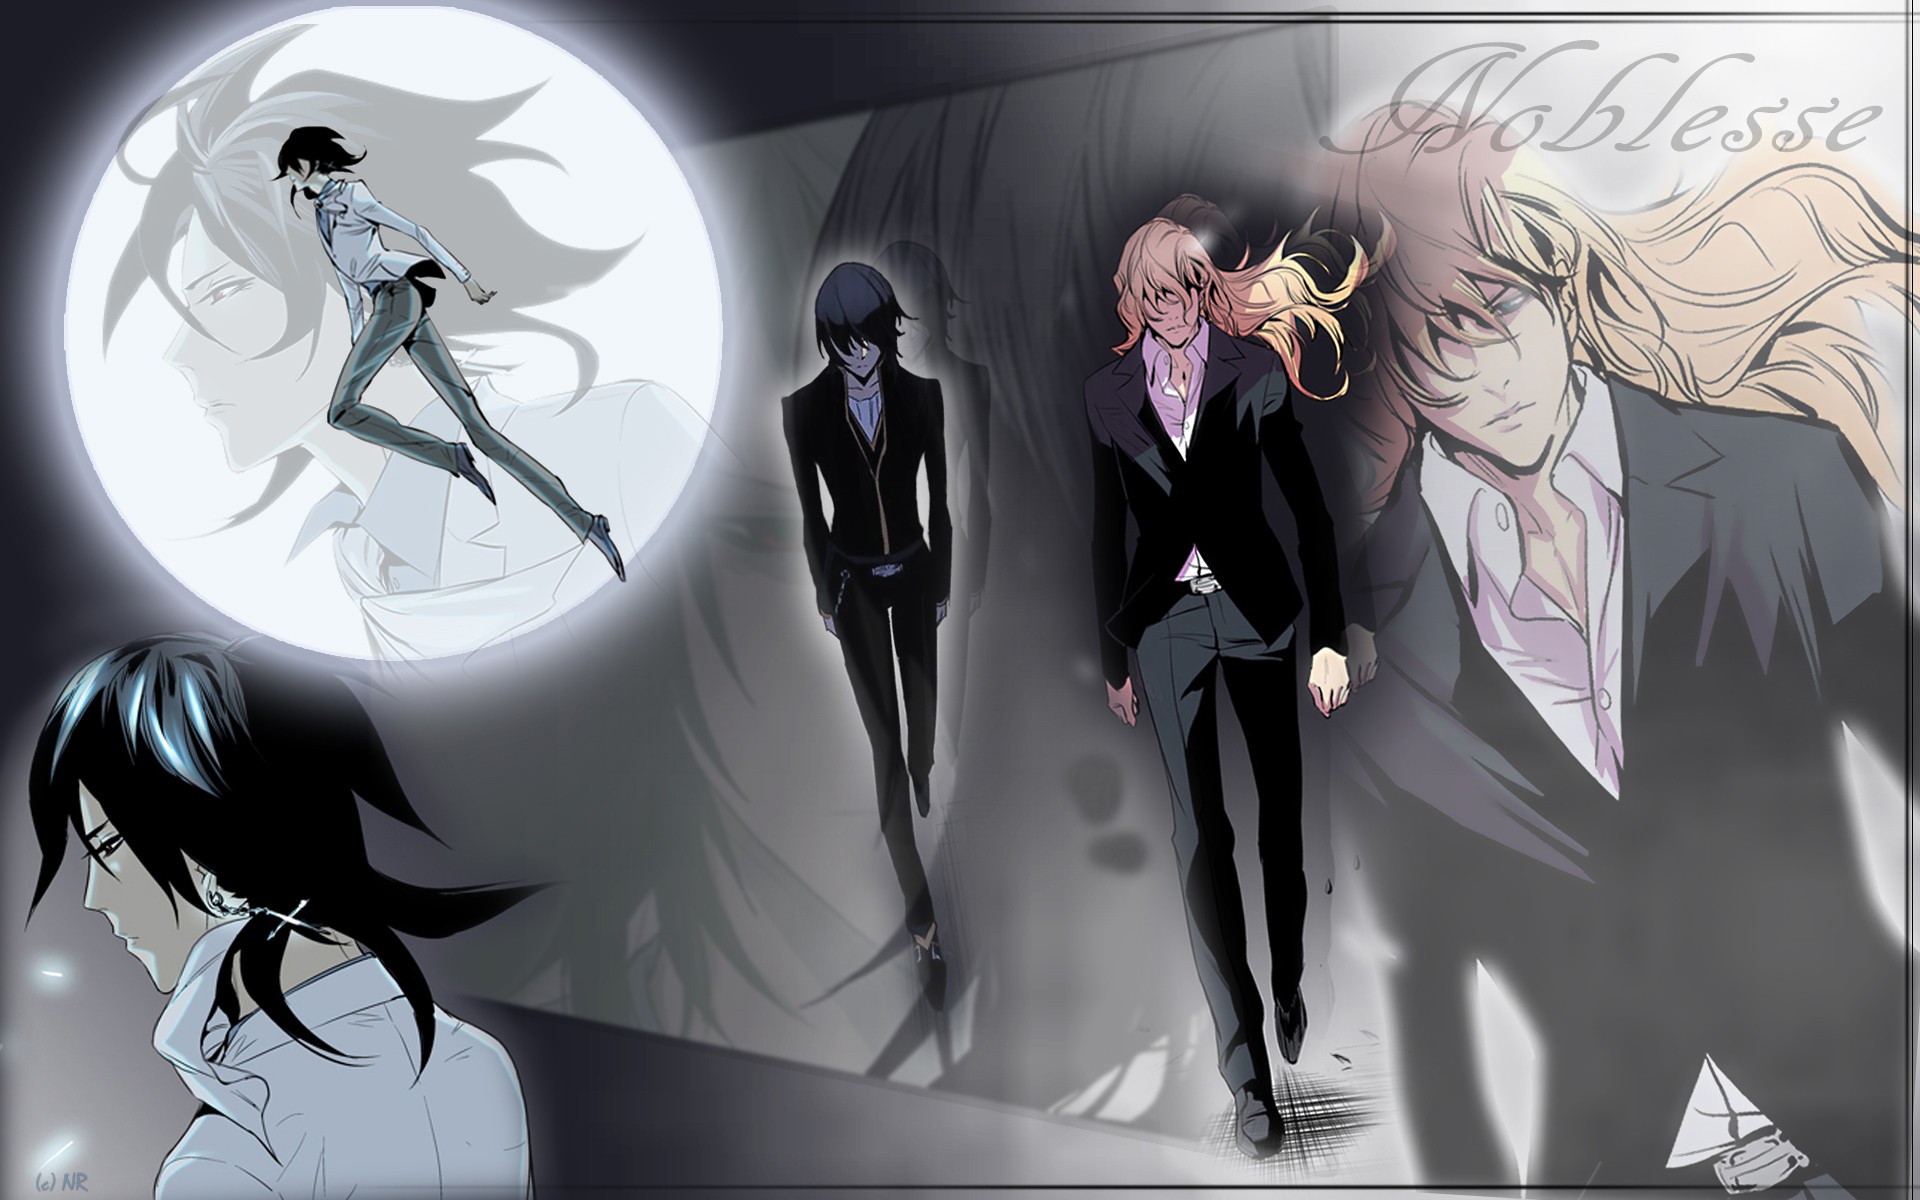 Wallpaper anime  noblesse hd  Facebook